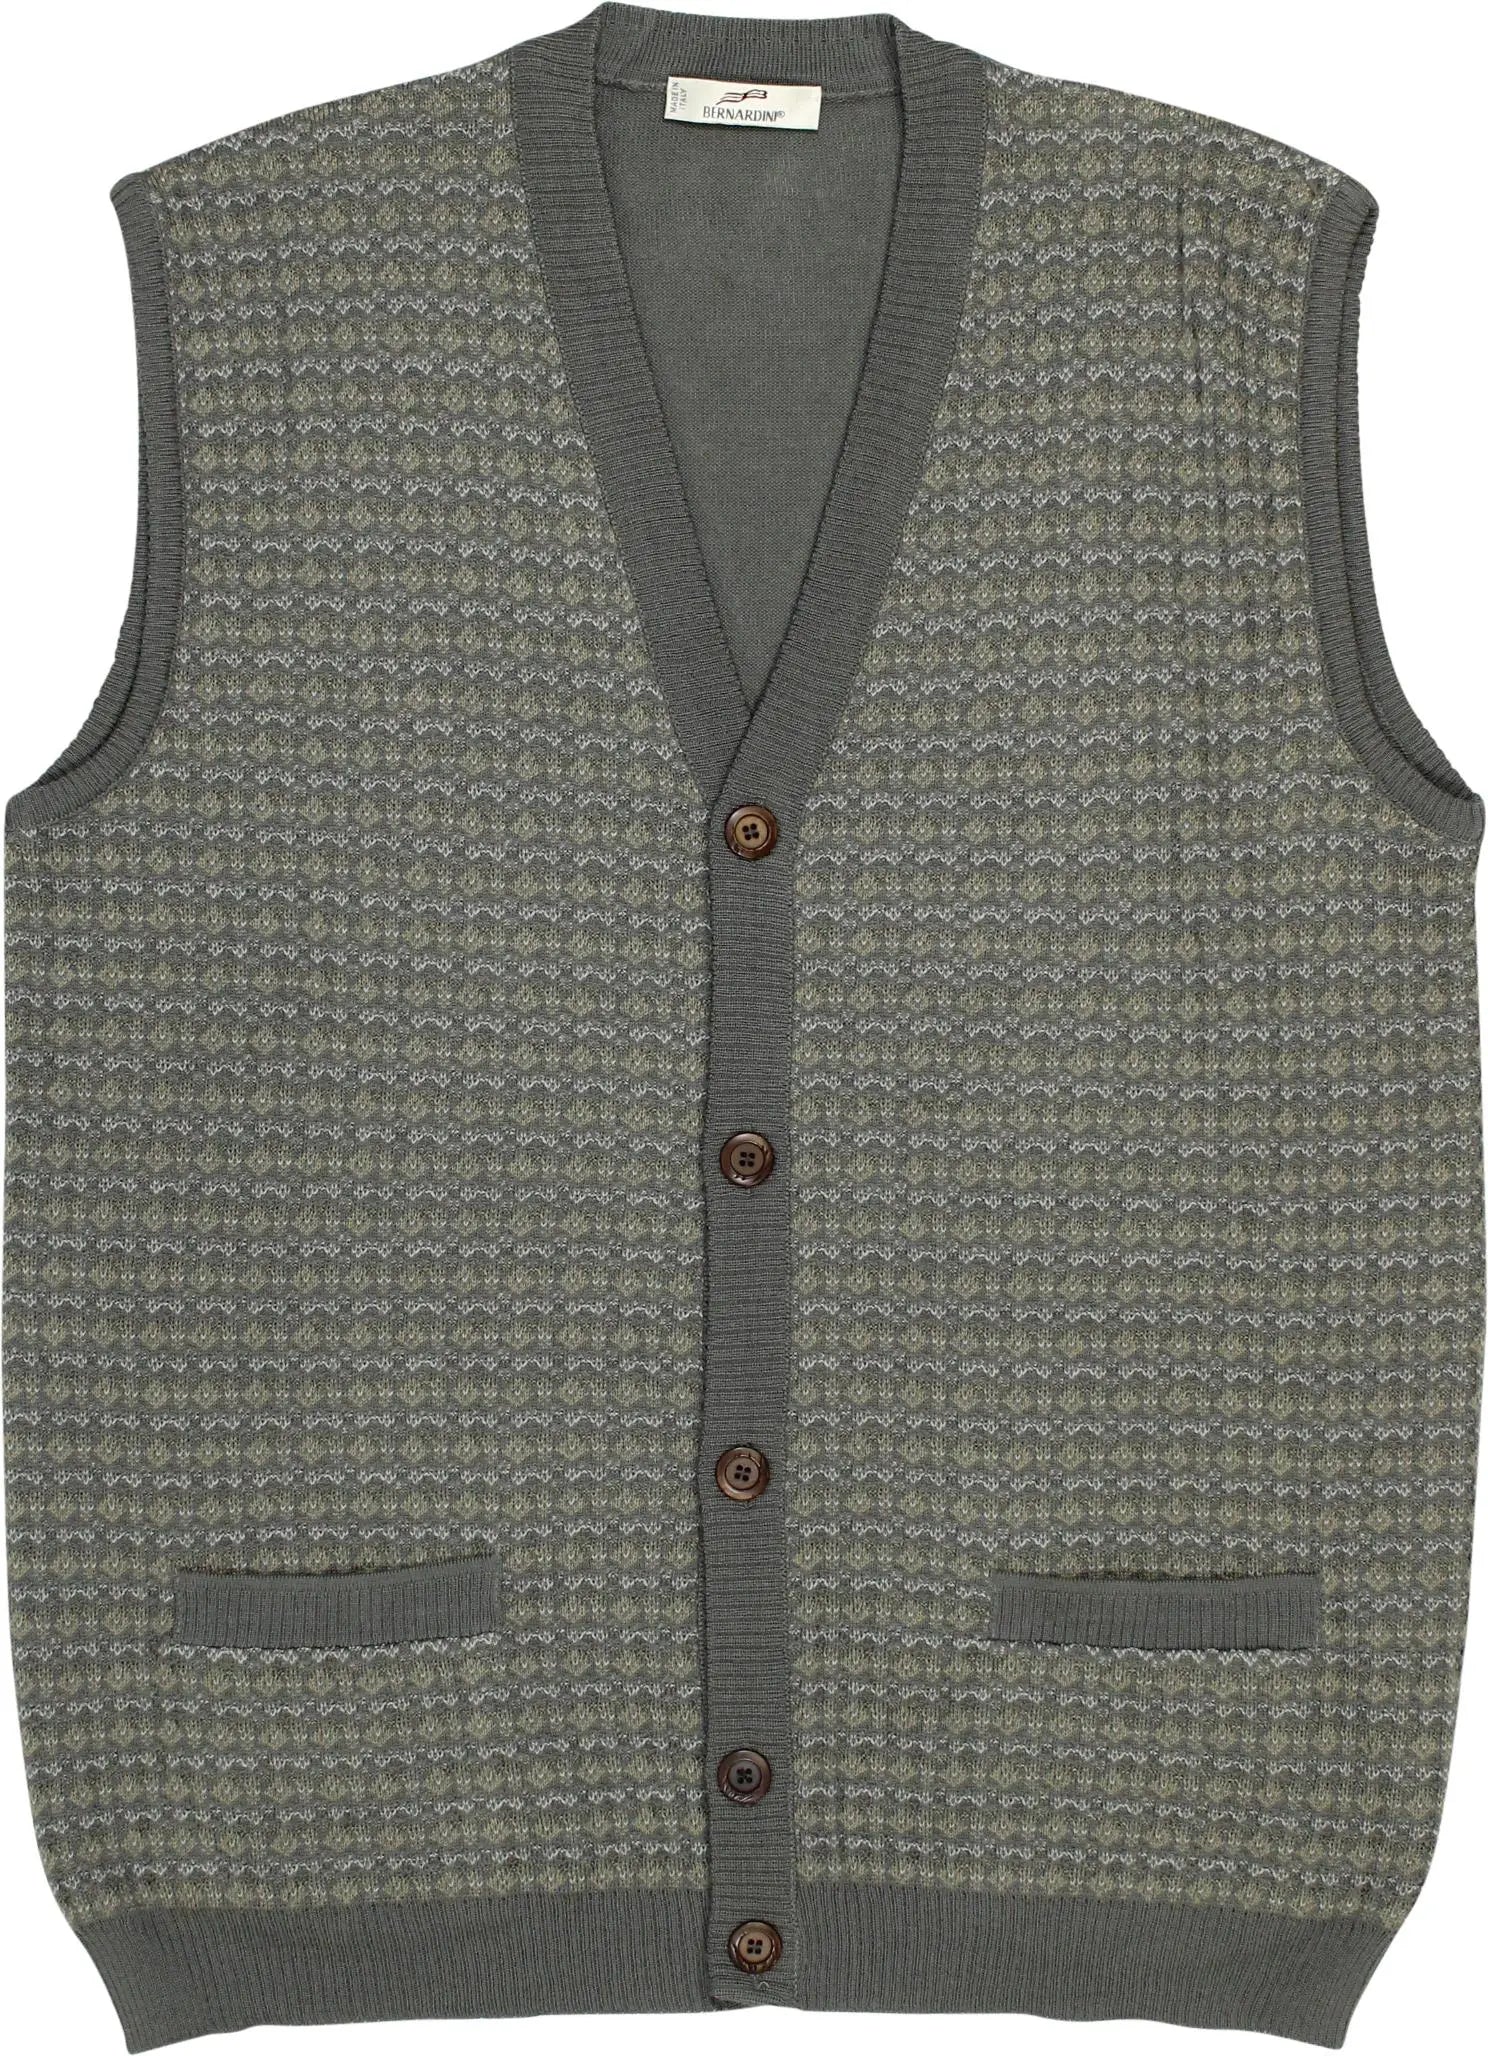 Bernardini - Grey Patterned Vest with Buttons- ThriftTale.com - Vintage and second handclothing